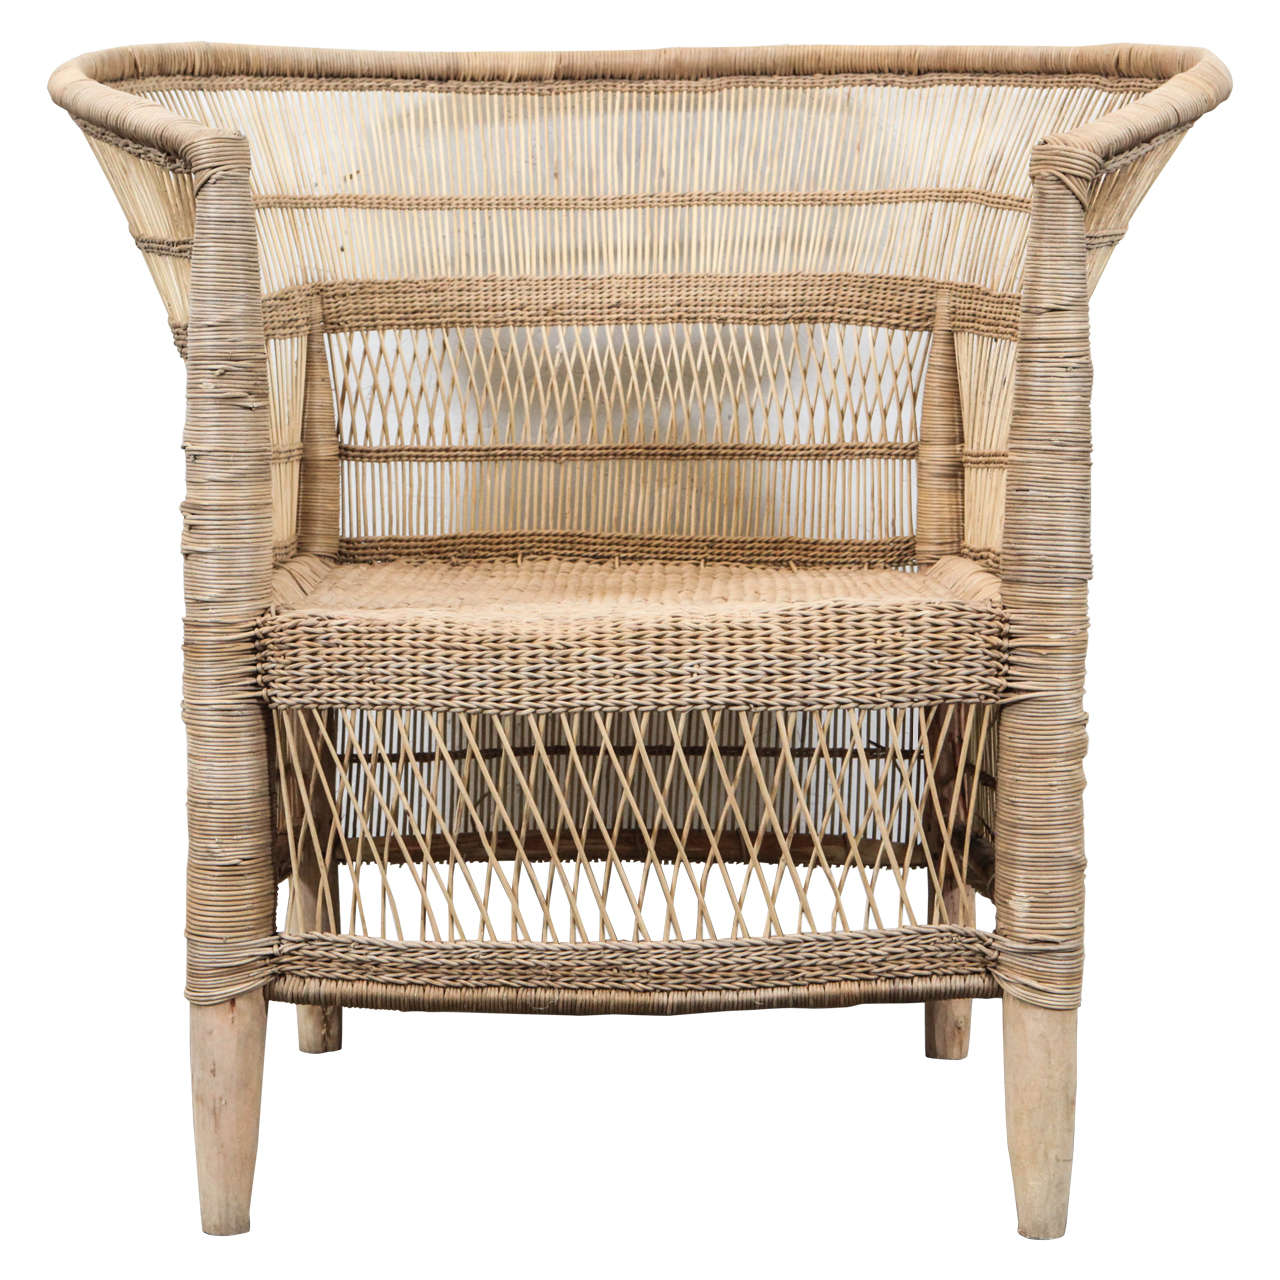 South African Wicker Armchair